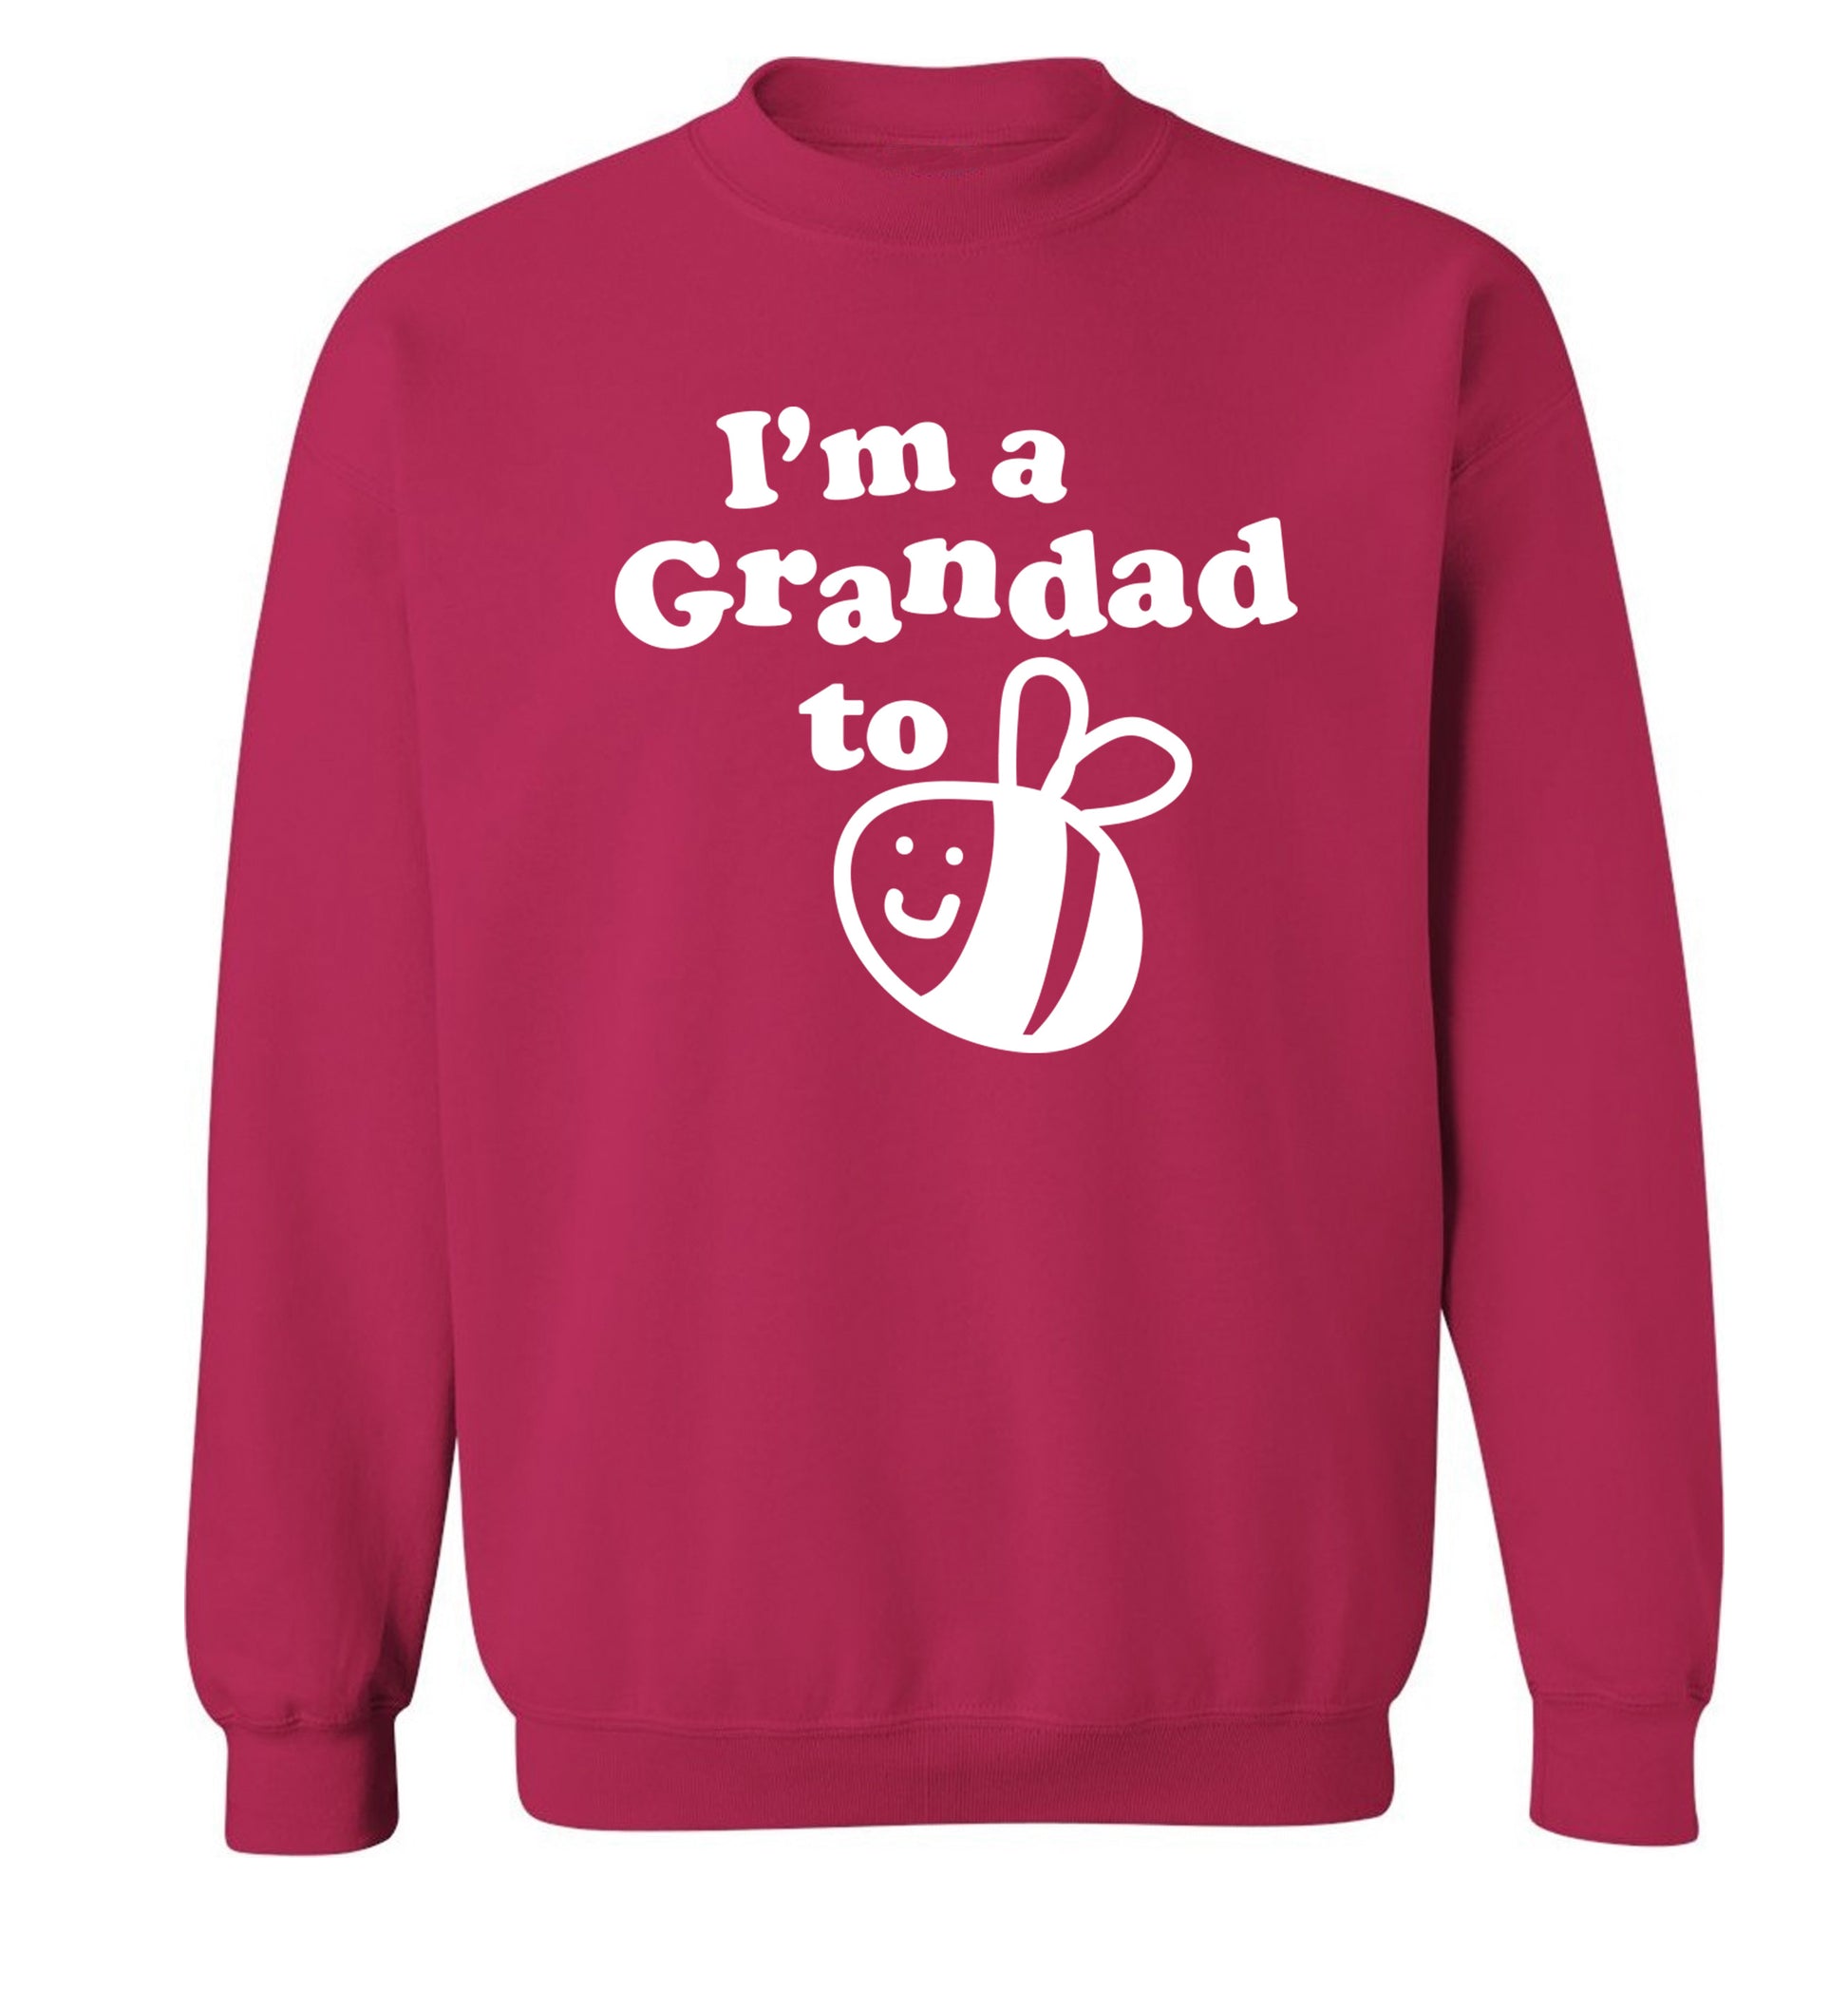 I'm a grandad to be Adult's unisex pink Sweater 2XL